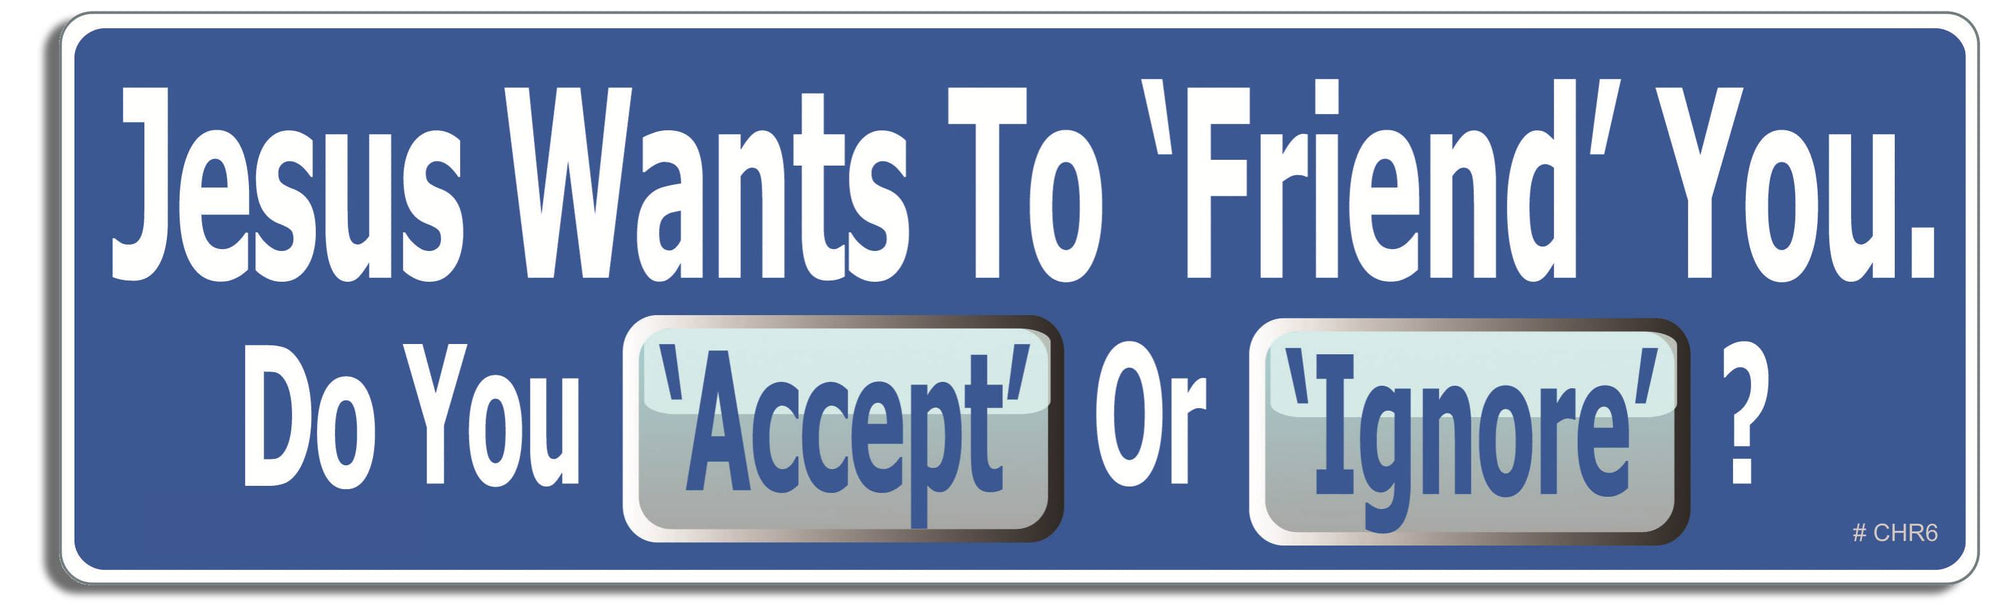 Jesus wants to friend you. Do you accept or ignore? - 3" x 10" Bumper Sticker--Car Magnet- -  Decal Bumper Sticker-Christian Bumper Sticker Car Magnet Jesus wants to friend you. Do you-  Decal for carschristian, church, faith, jesus, pray, Religion